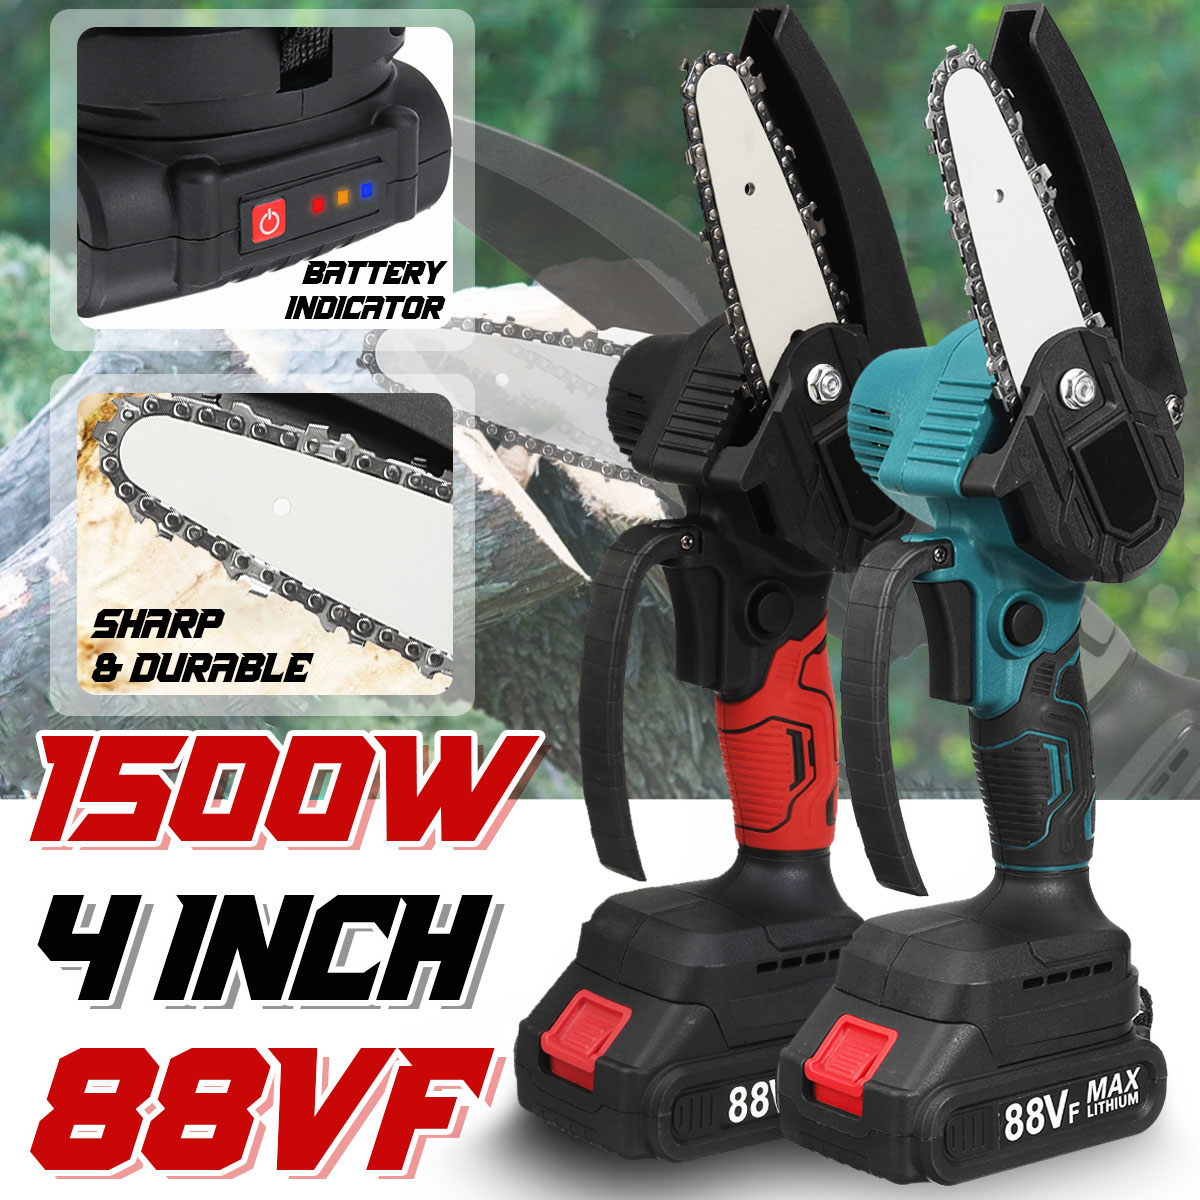 88VF-4-Inch-Battery-Indicator-Electric-Chainsaws-Wood-Cutter-One-Hand-Saw-Woodworking-Tool-W-None12--1866700-1